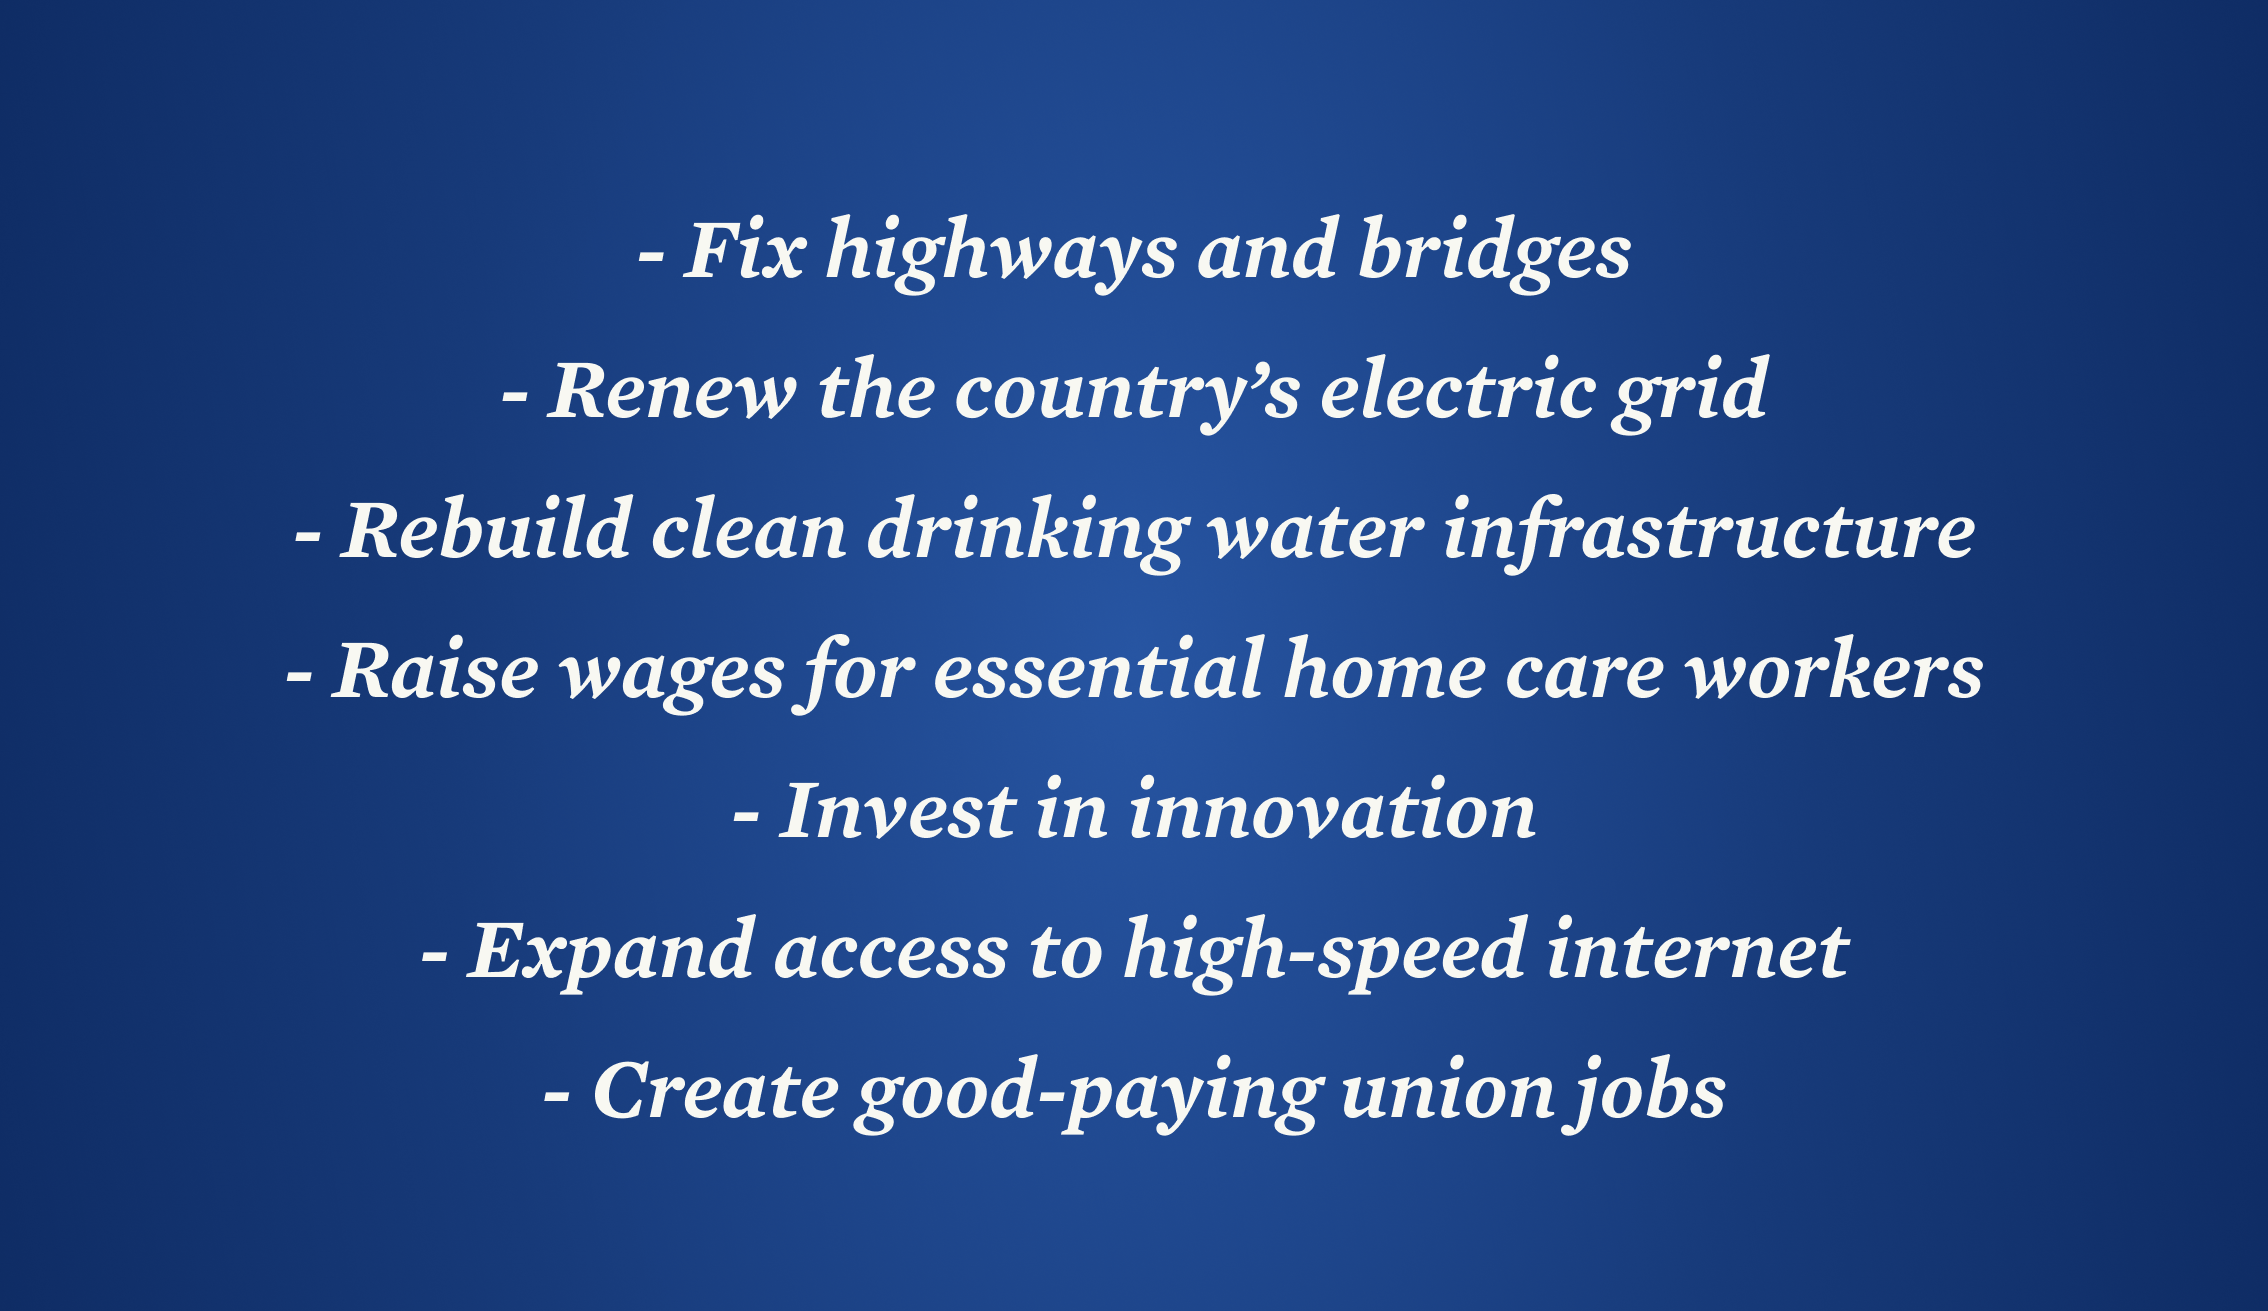 Fix highways and bridges, renew the country’s electric grid, rebuild clean drinking water infrastructure, raise wages for essential home care workers, invest in innovation, expand access to high-speed internet, create good-paying union jobs